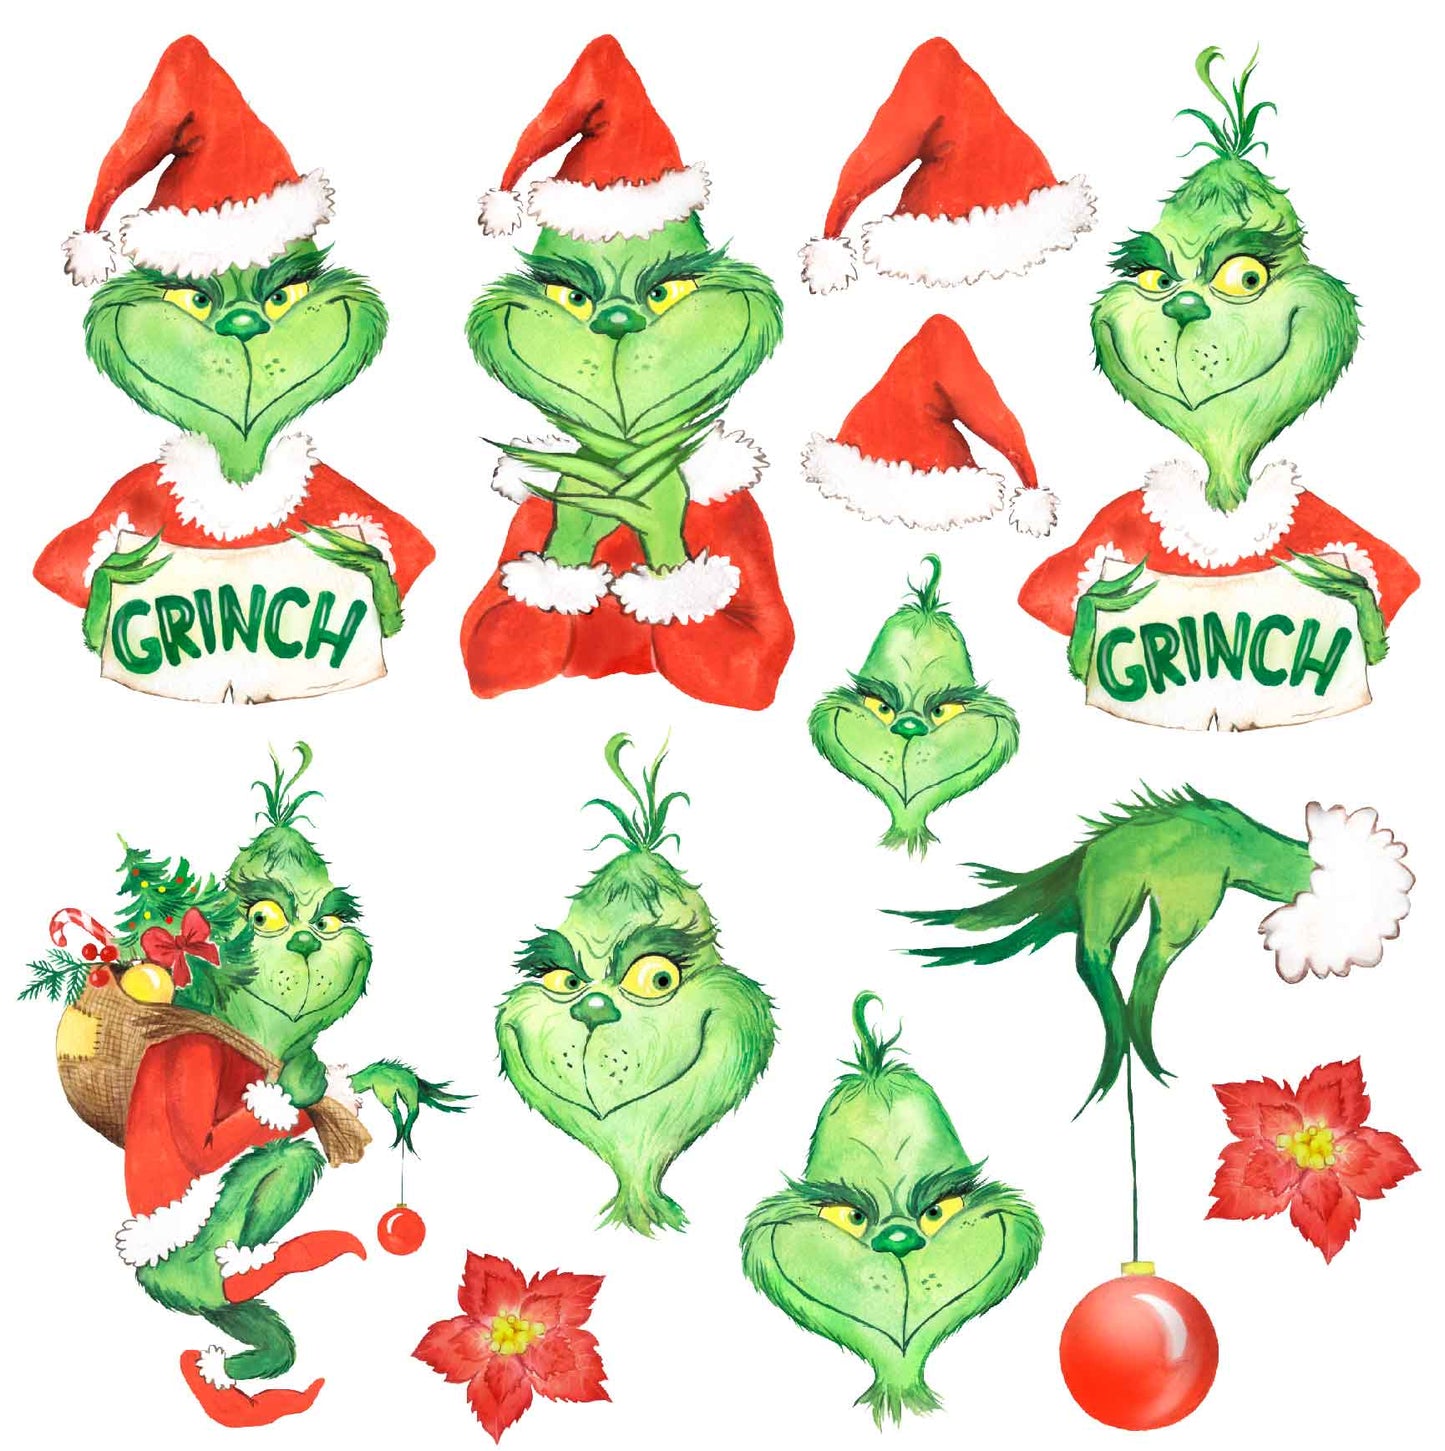 Grinch WC Half Sheet  (Must Purchase 2 Half sheets - You Can Mix & Match)